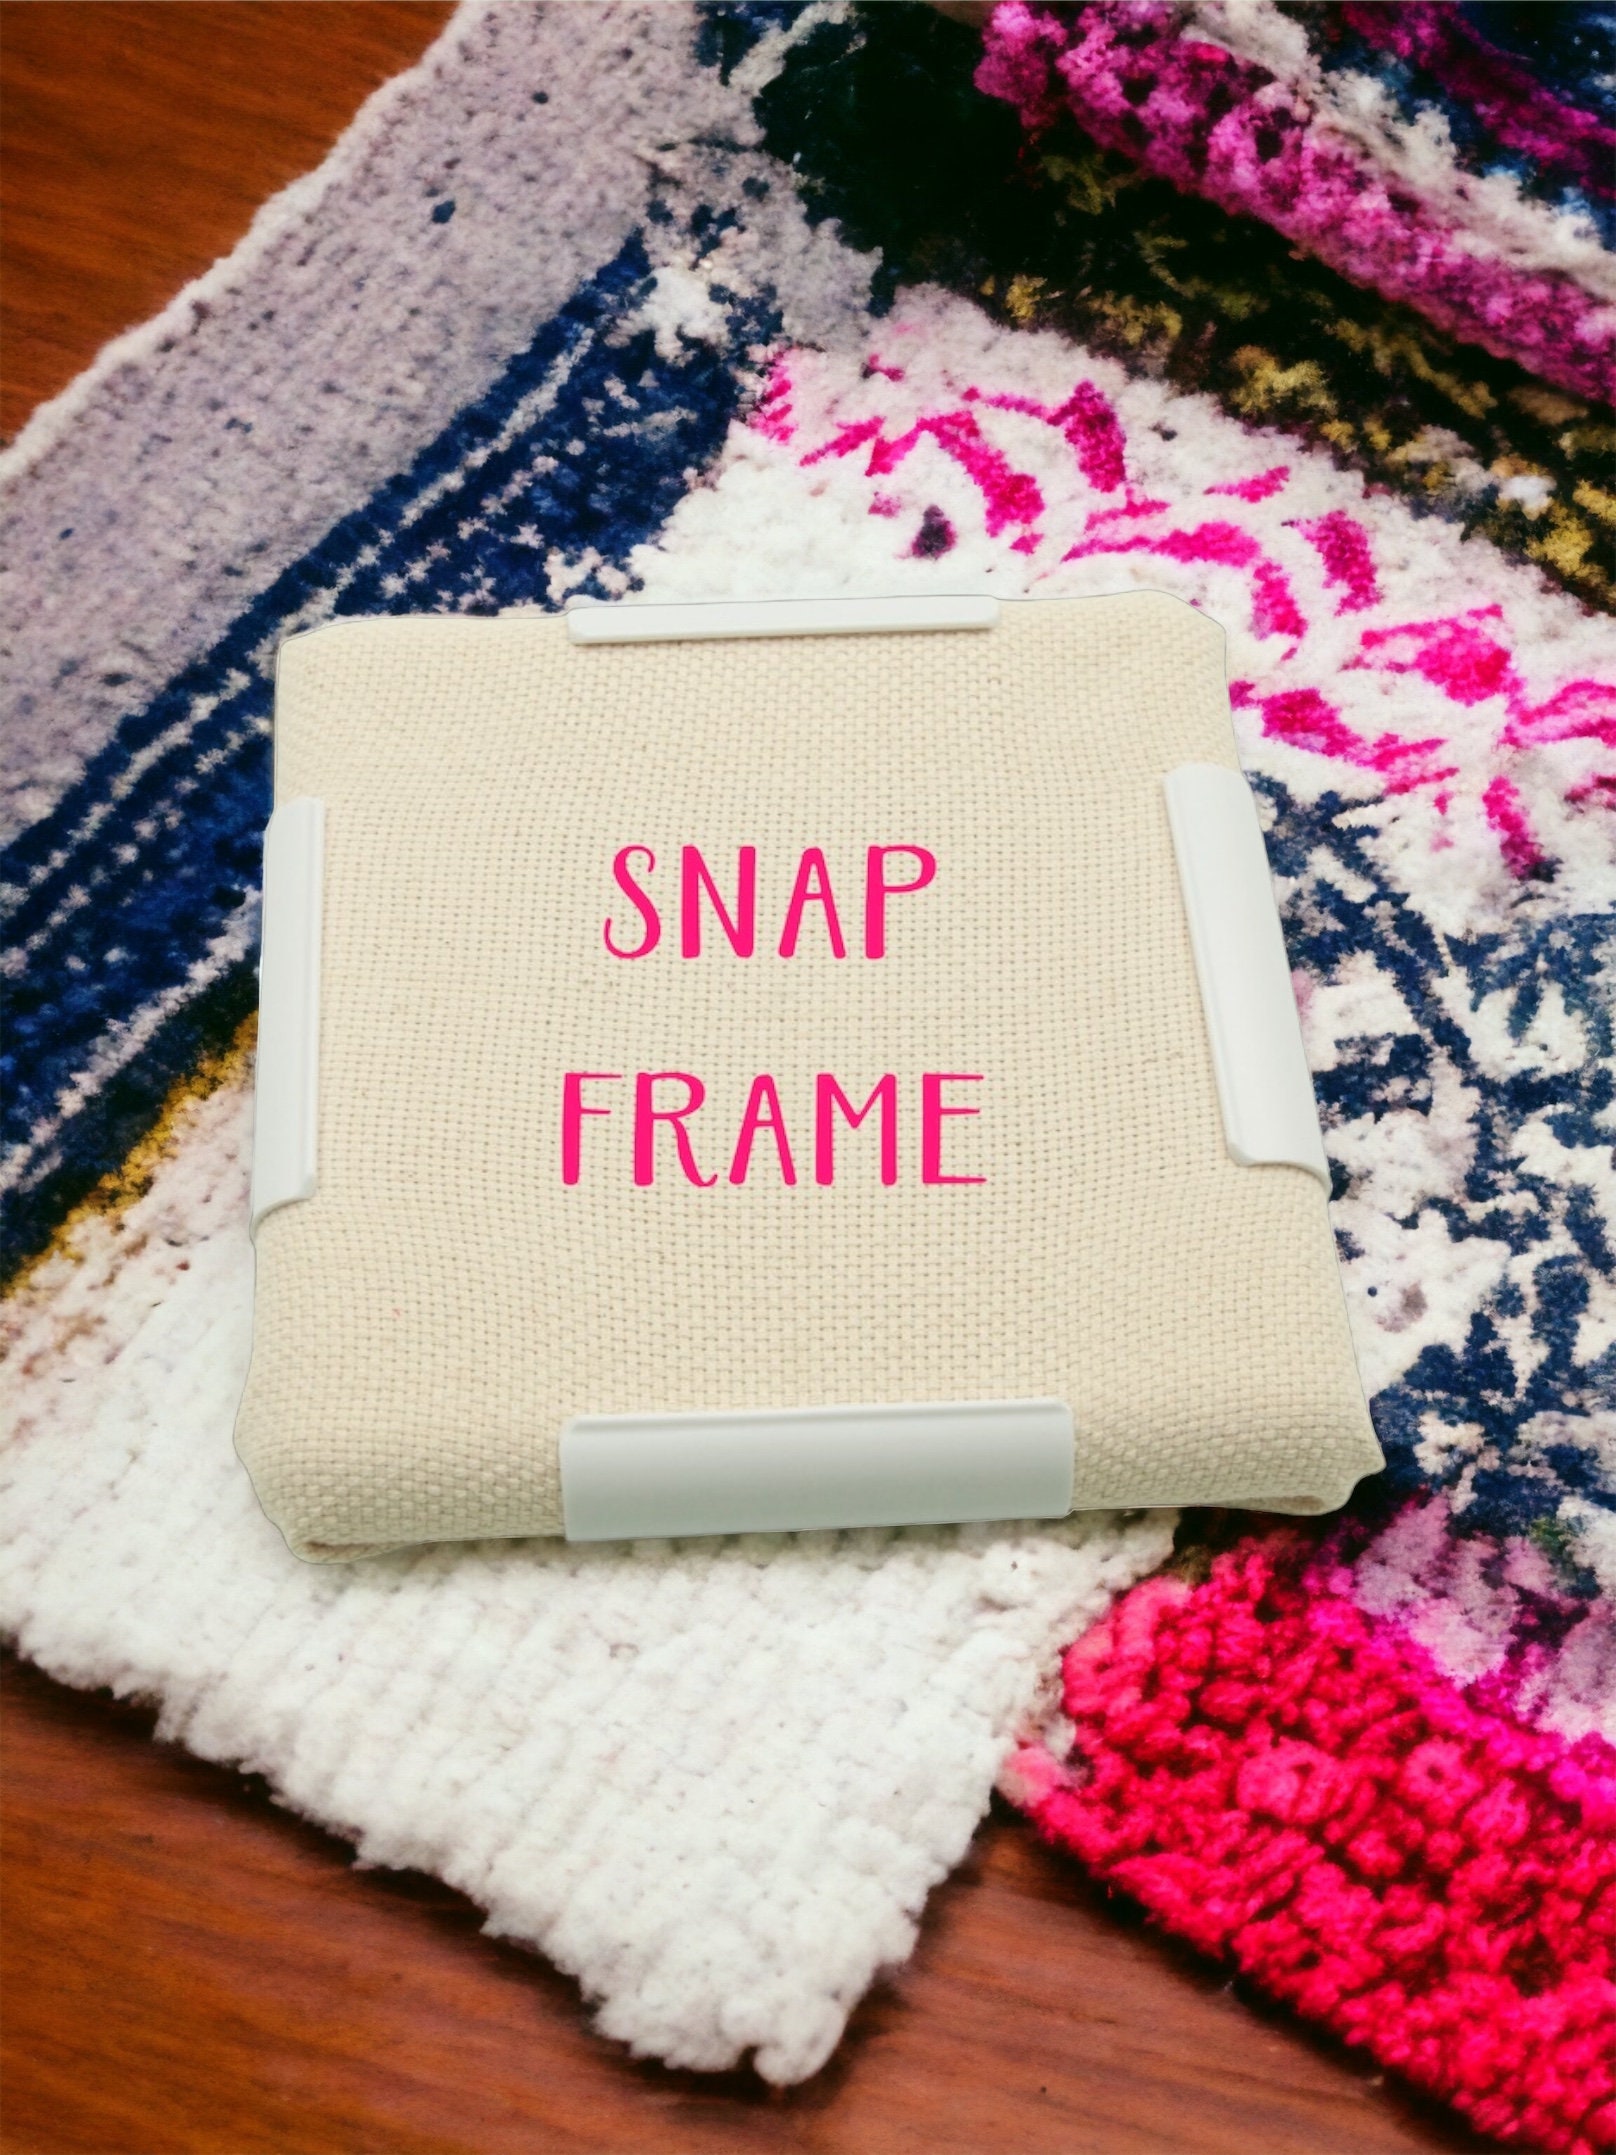 Q-snap Extension Kit, Q Snap Frame for Embroidery, Cross Stitch